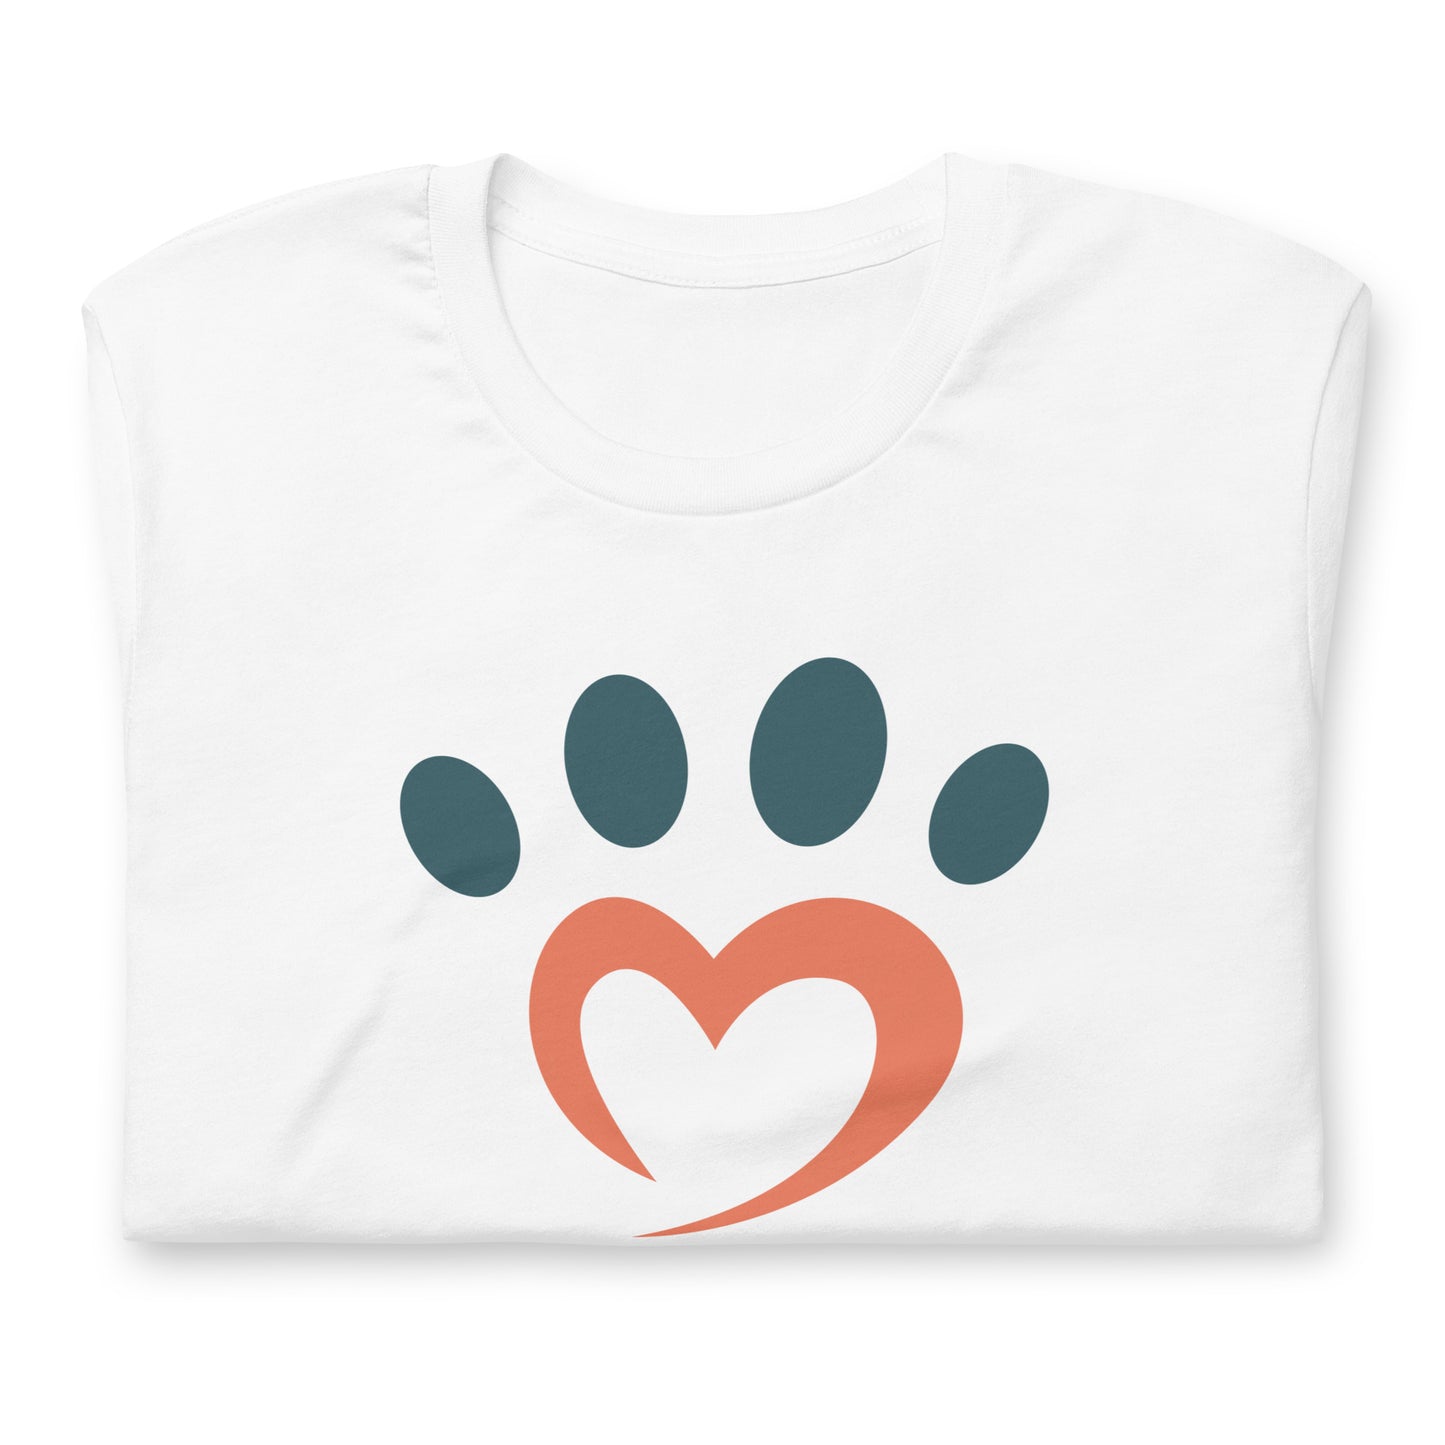 Heart Dog Paw T-Shirt - Love Paw Print Tee for Dog Owners - Soft Cotton Pet Lover Shirt - Unisex Fit Animal Enthusiast Gift